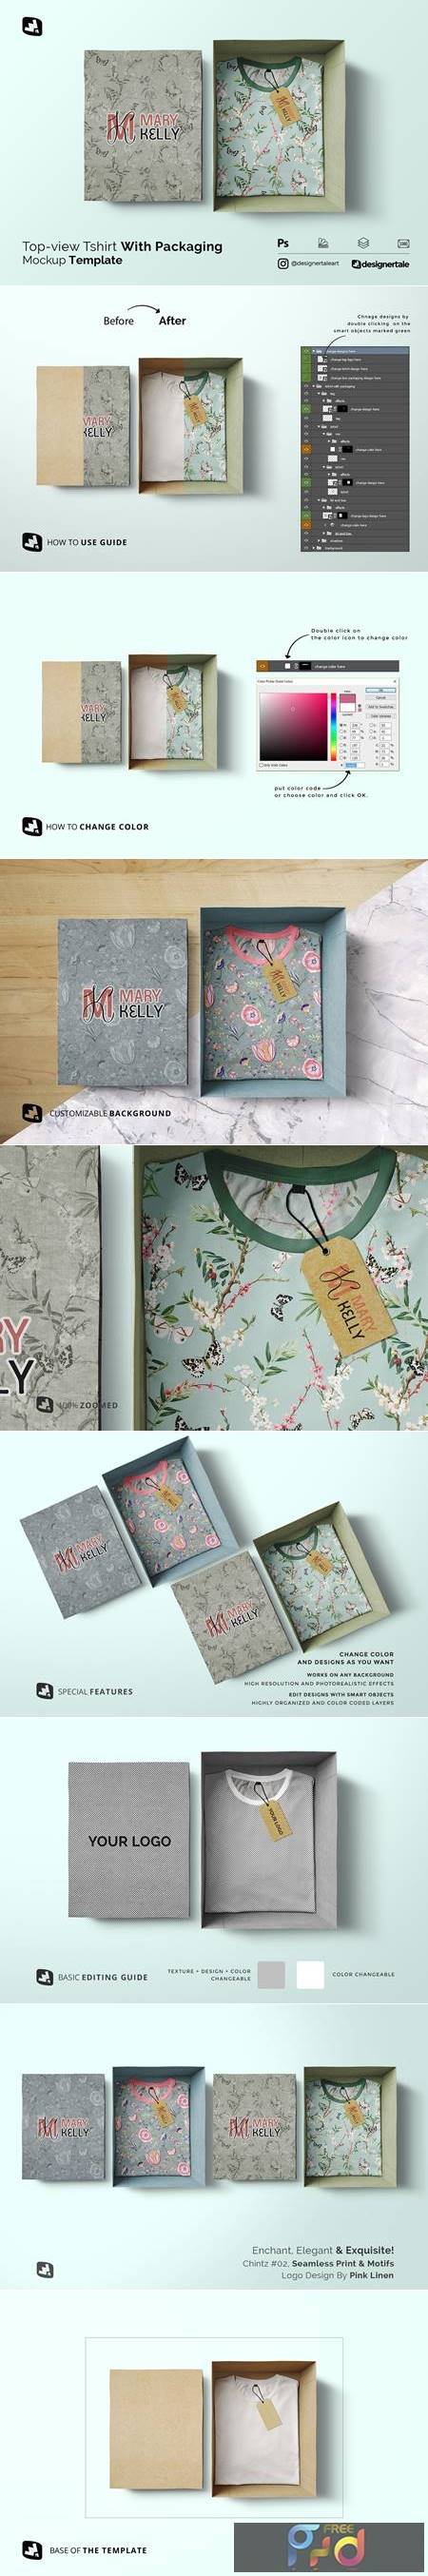 Tshirt With Packaging Mockup 4893839 1